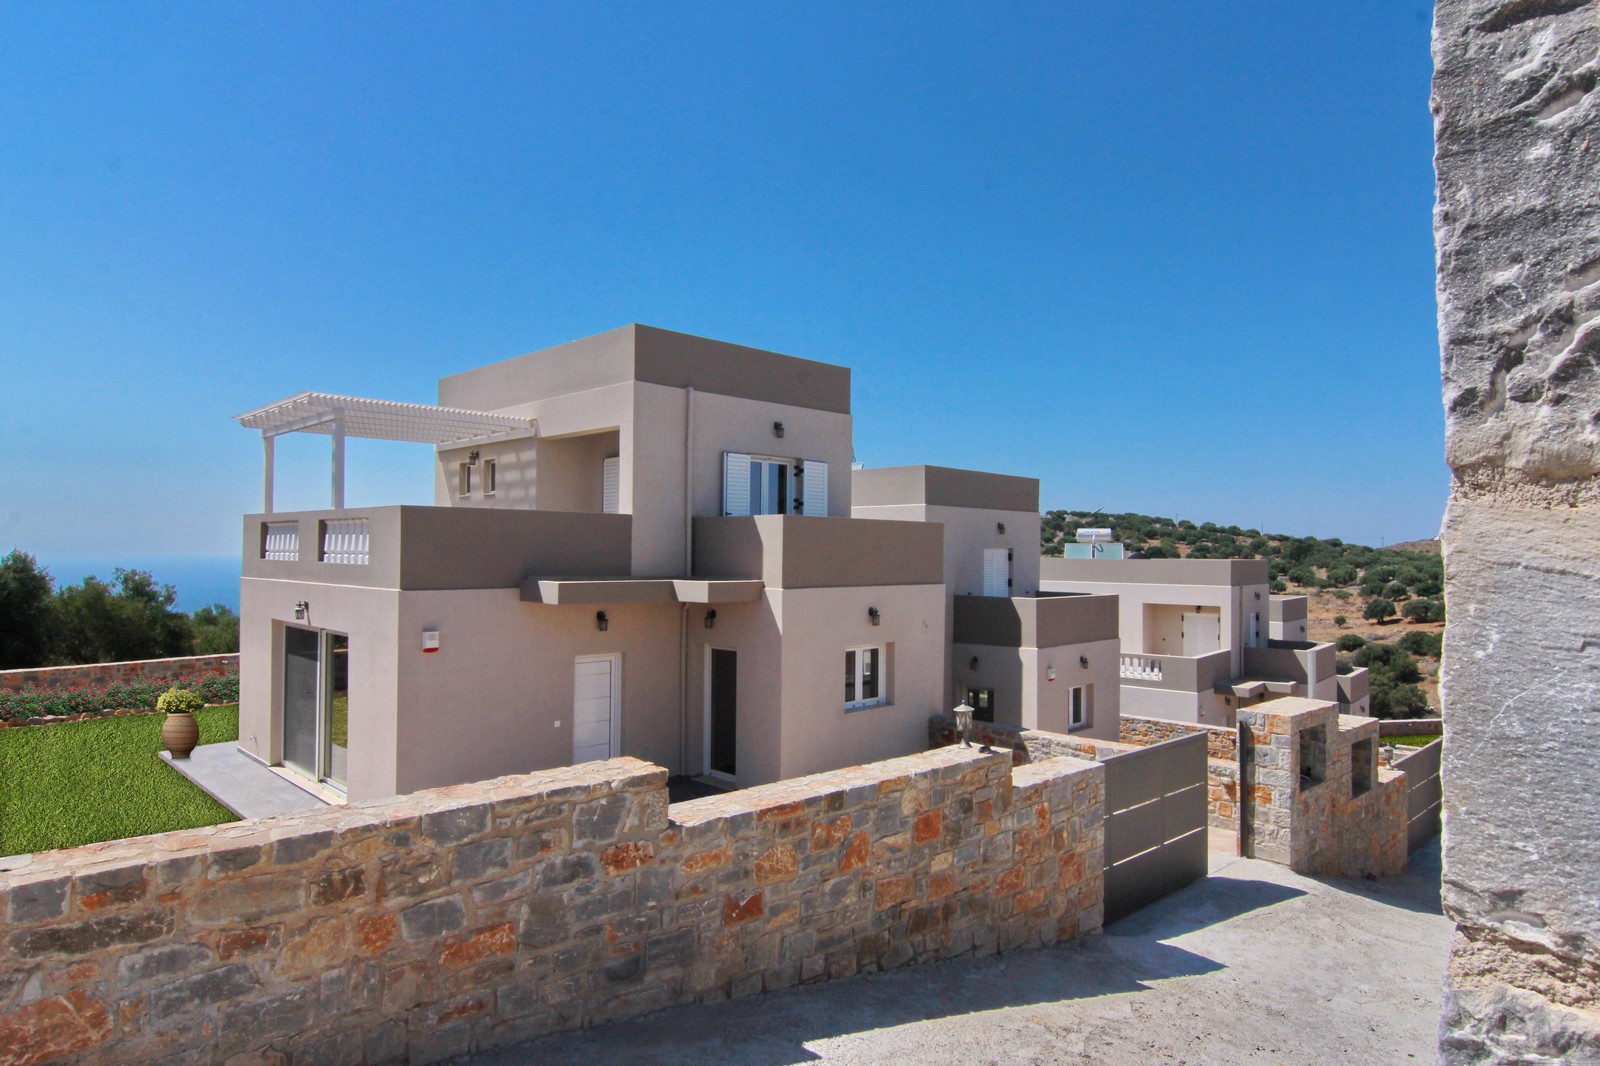 Unique Detached House 110m2on a plot of 300m2. with an incredible view.